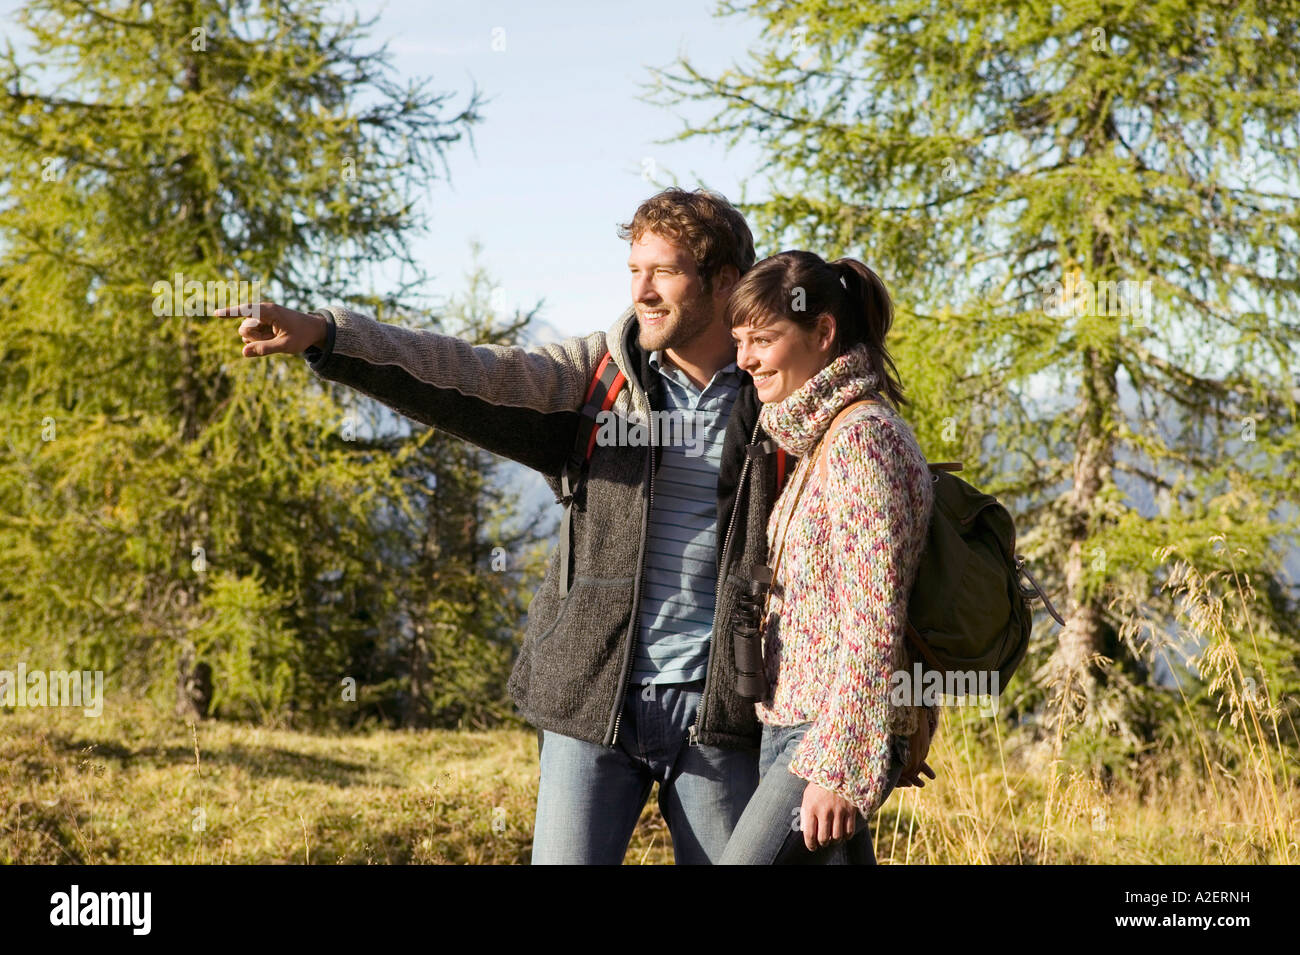 Young couple walking in meadow, man pointing Stock Photo